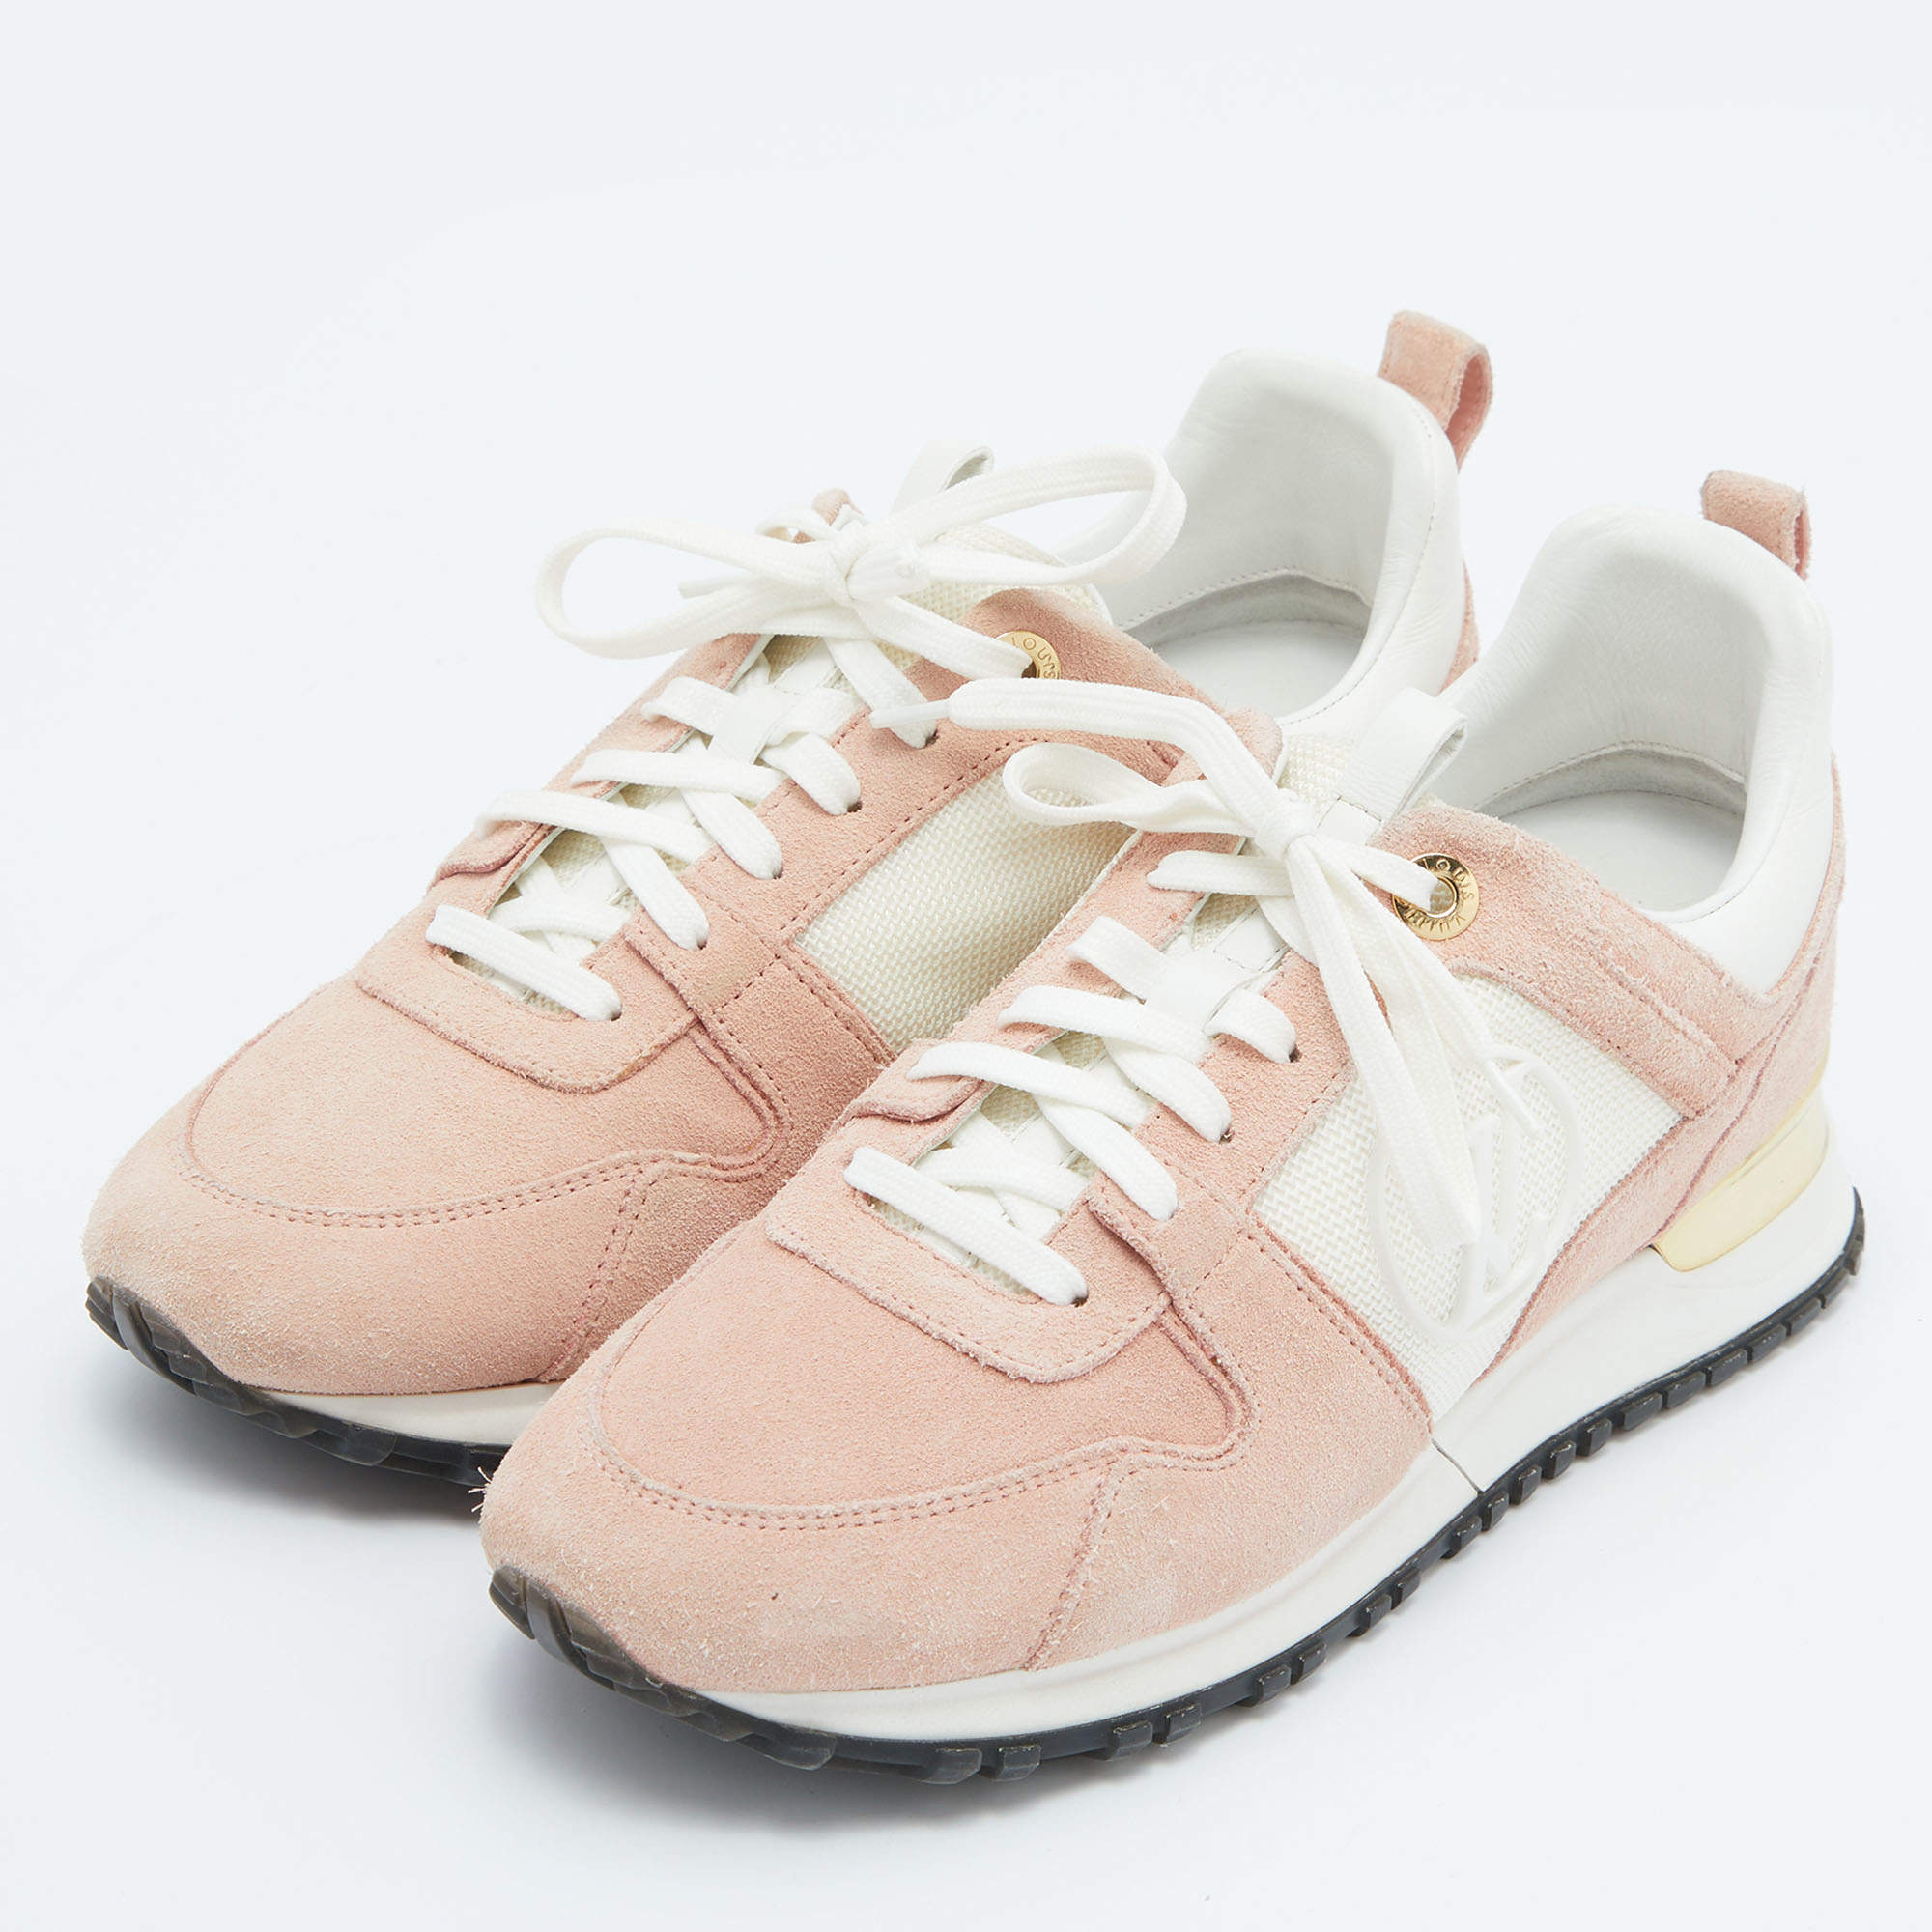 Run away leather trainers Louis Vuitton Pink size 41 EU in Leather -  31712038